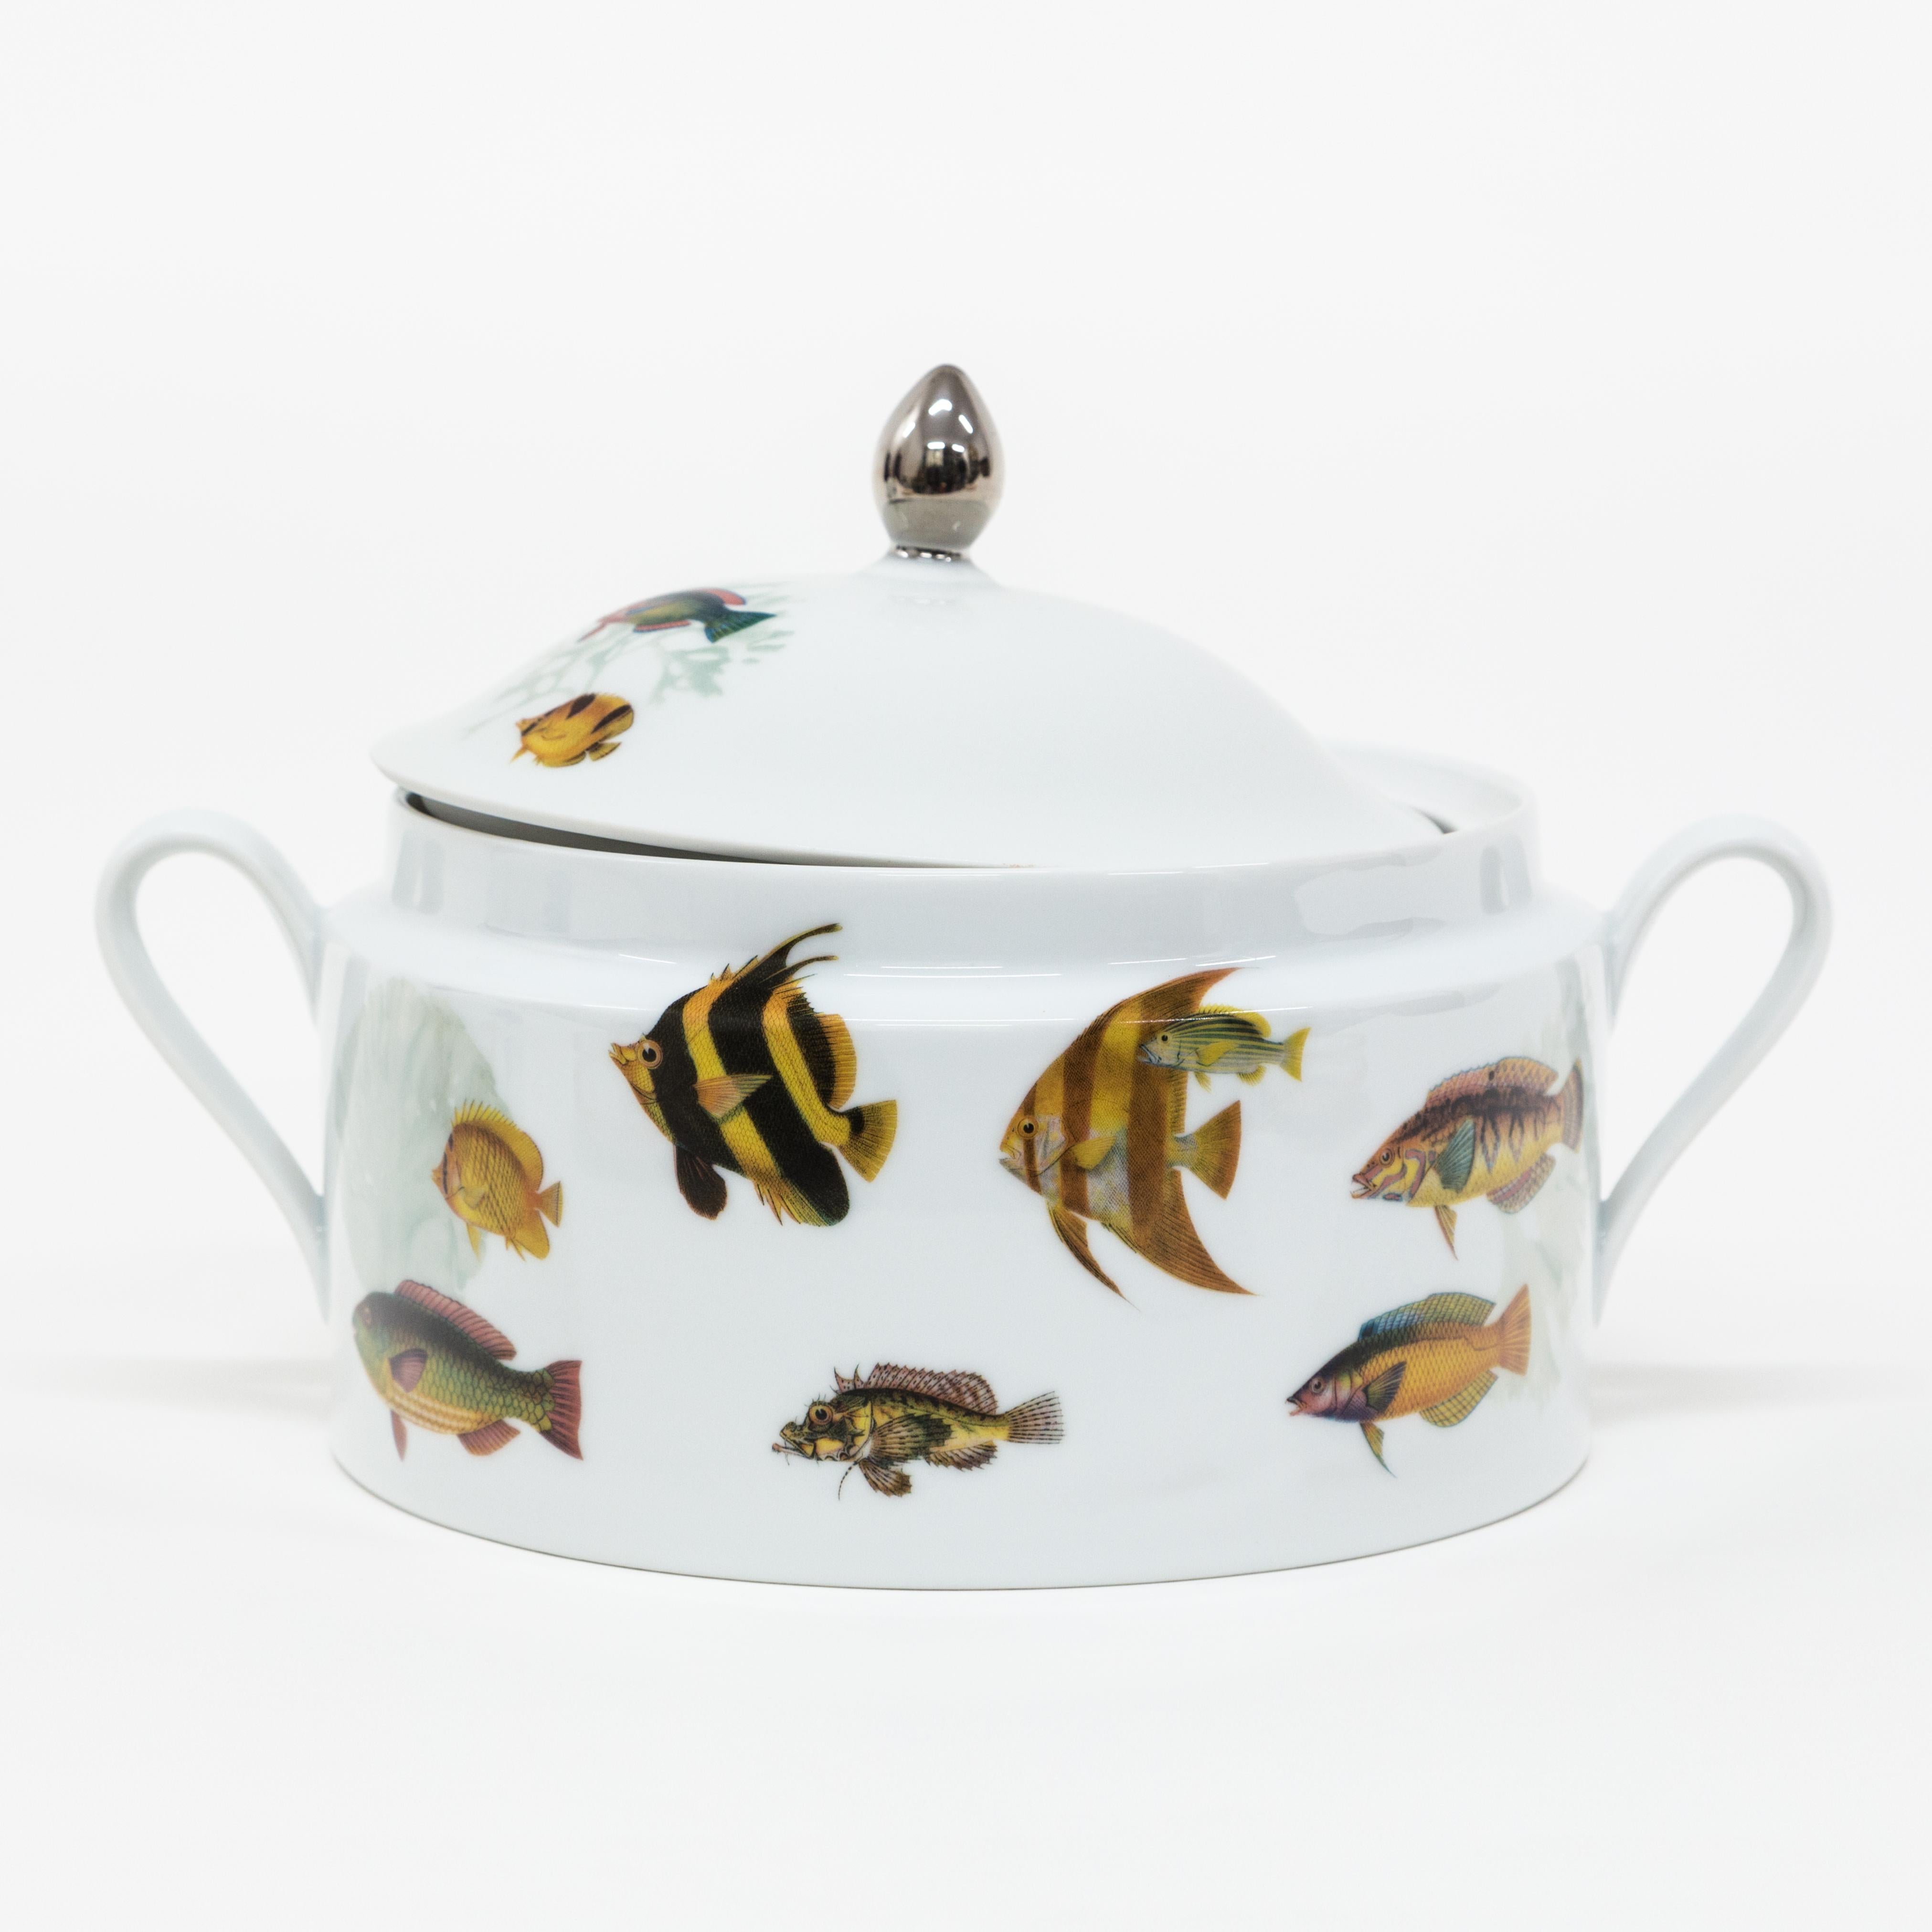 This soup tureen is a Grand Tour piece by Vito Nesta that is part of the Amami porcelain collection. The coral reef of the Amami Islands, an archipelago off the coast of Japan, inspired the design of this product where colourful fish swim on the